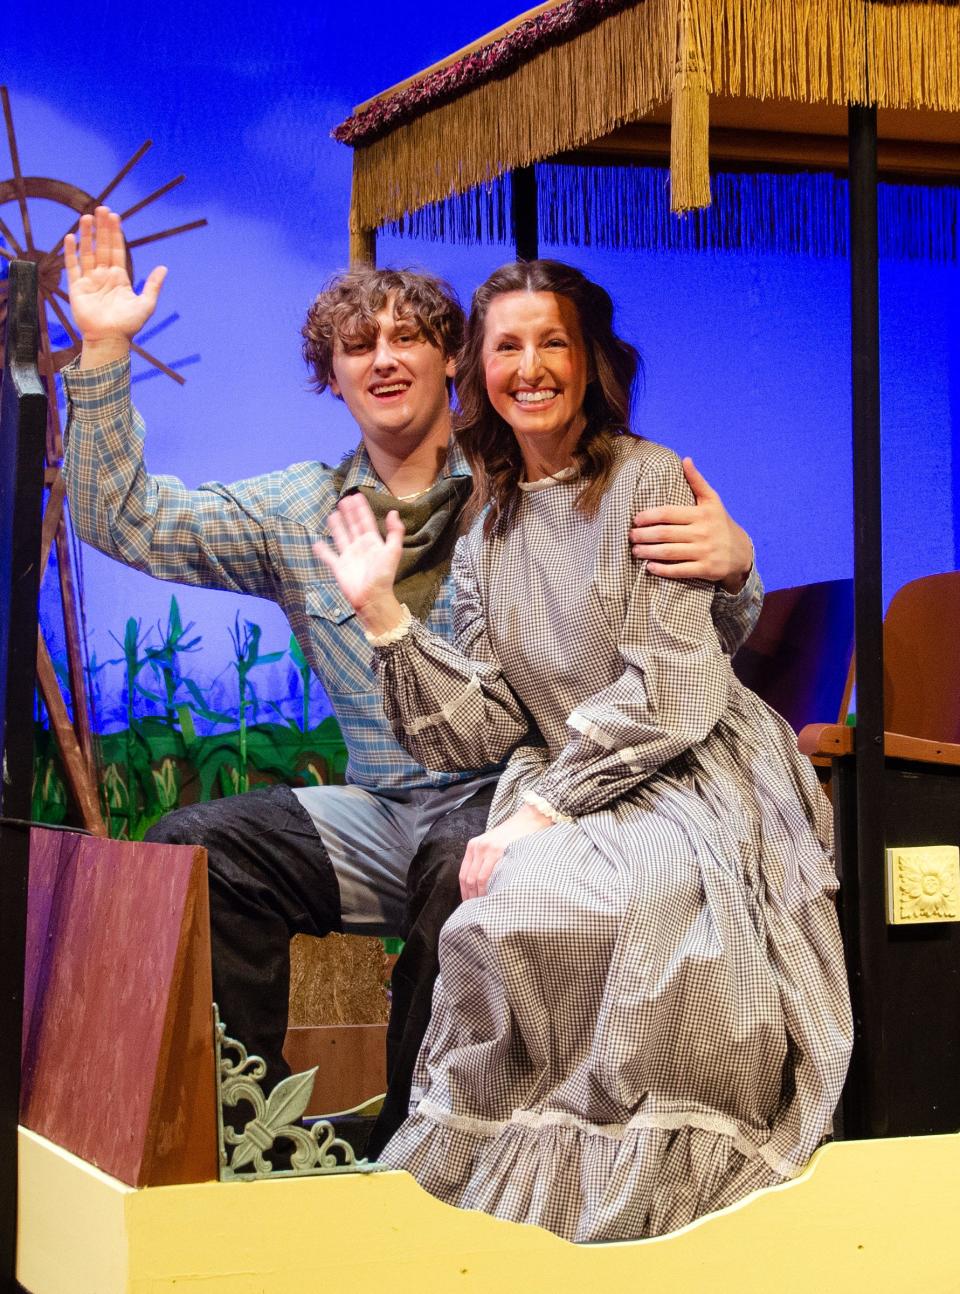 Laurey (Alison Matas Smith) and Curly (Tim Pinter III) will perform in "Oklahoma!" Carnation City Players will present the production this weekend and Feb. 23-25 at Firehouse Theater in downtown Alliance.